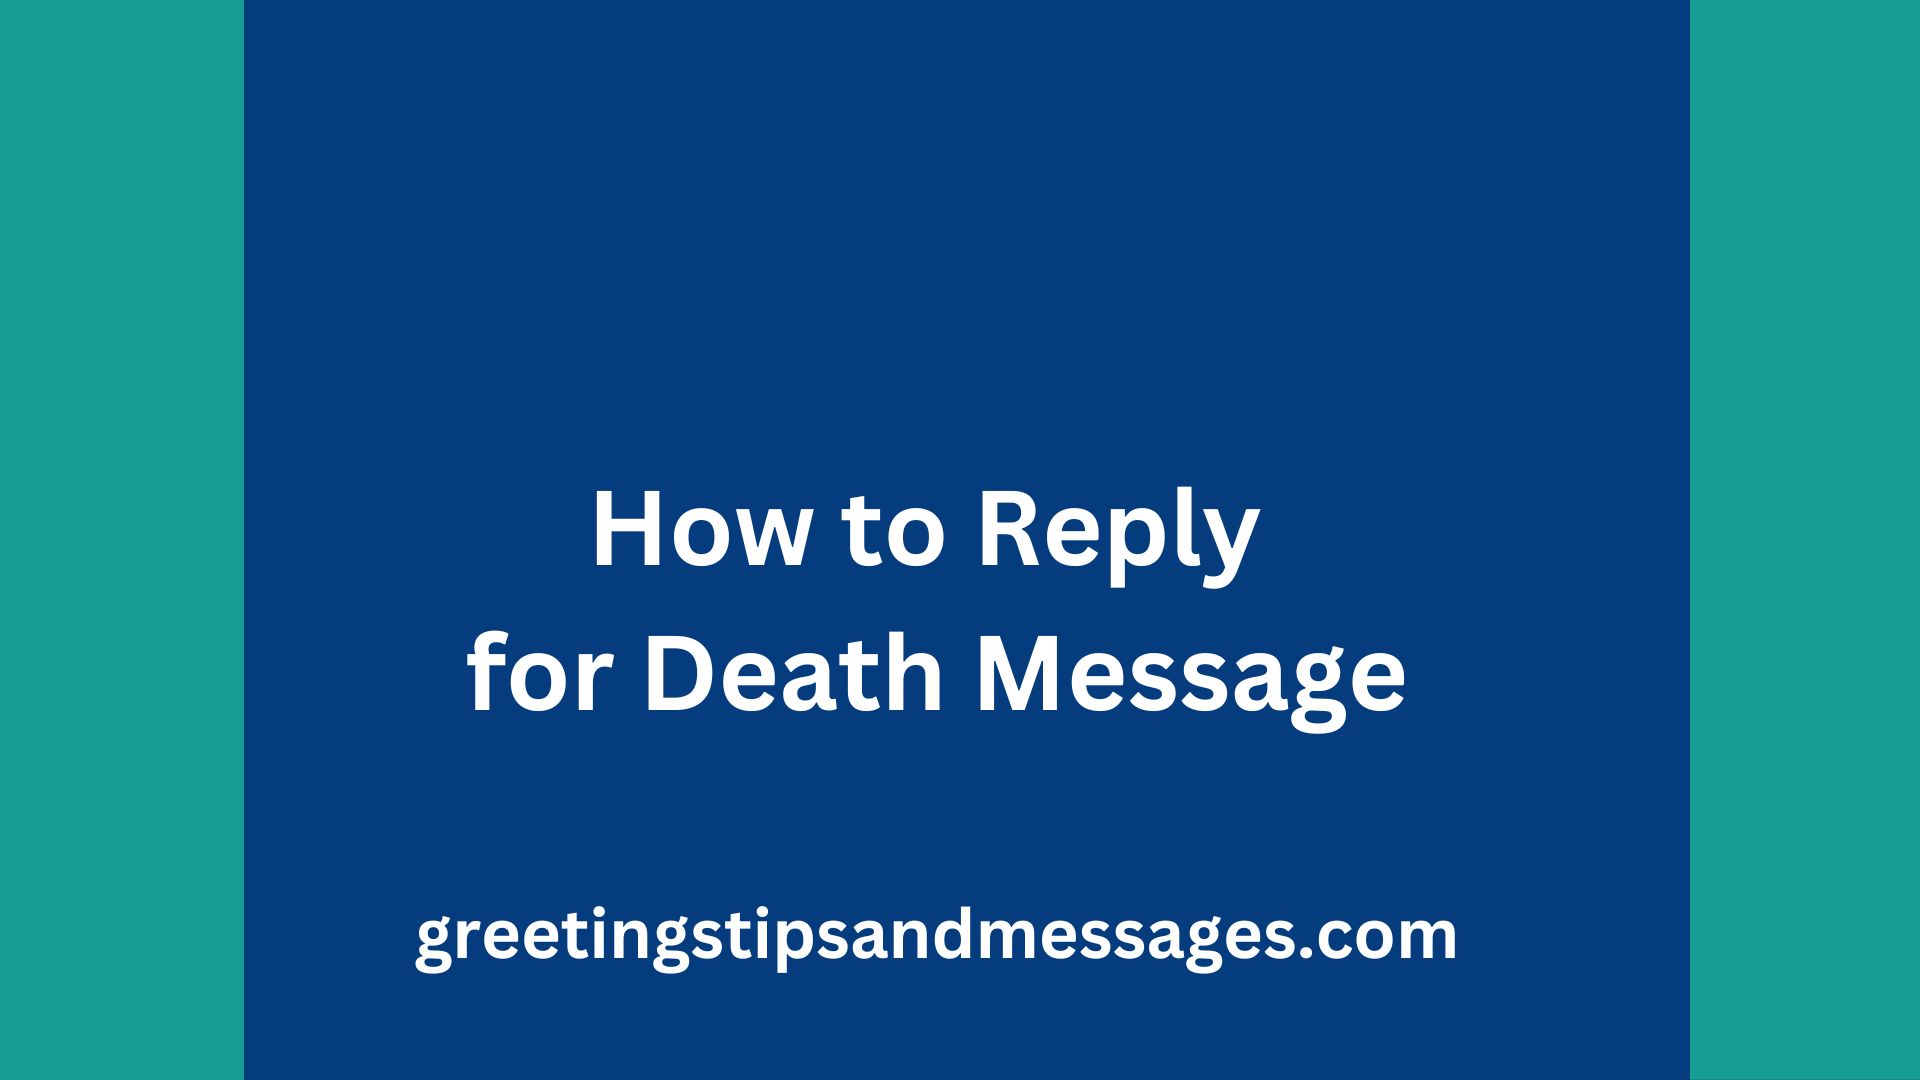 How to Reply for Death Message